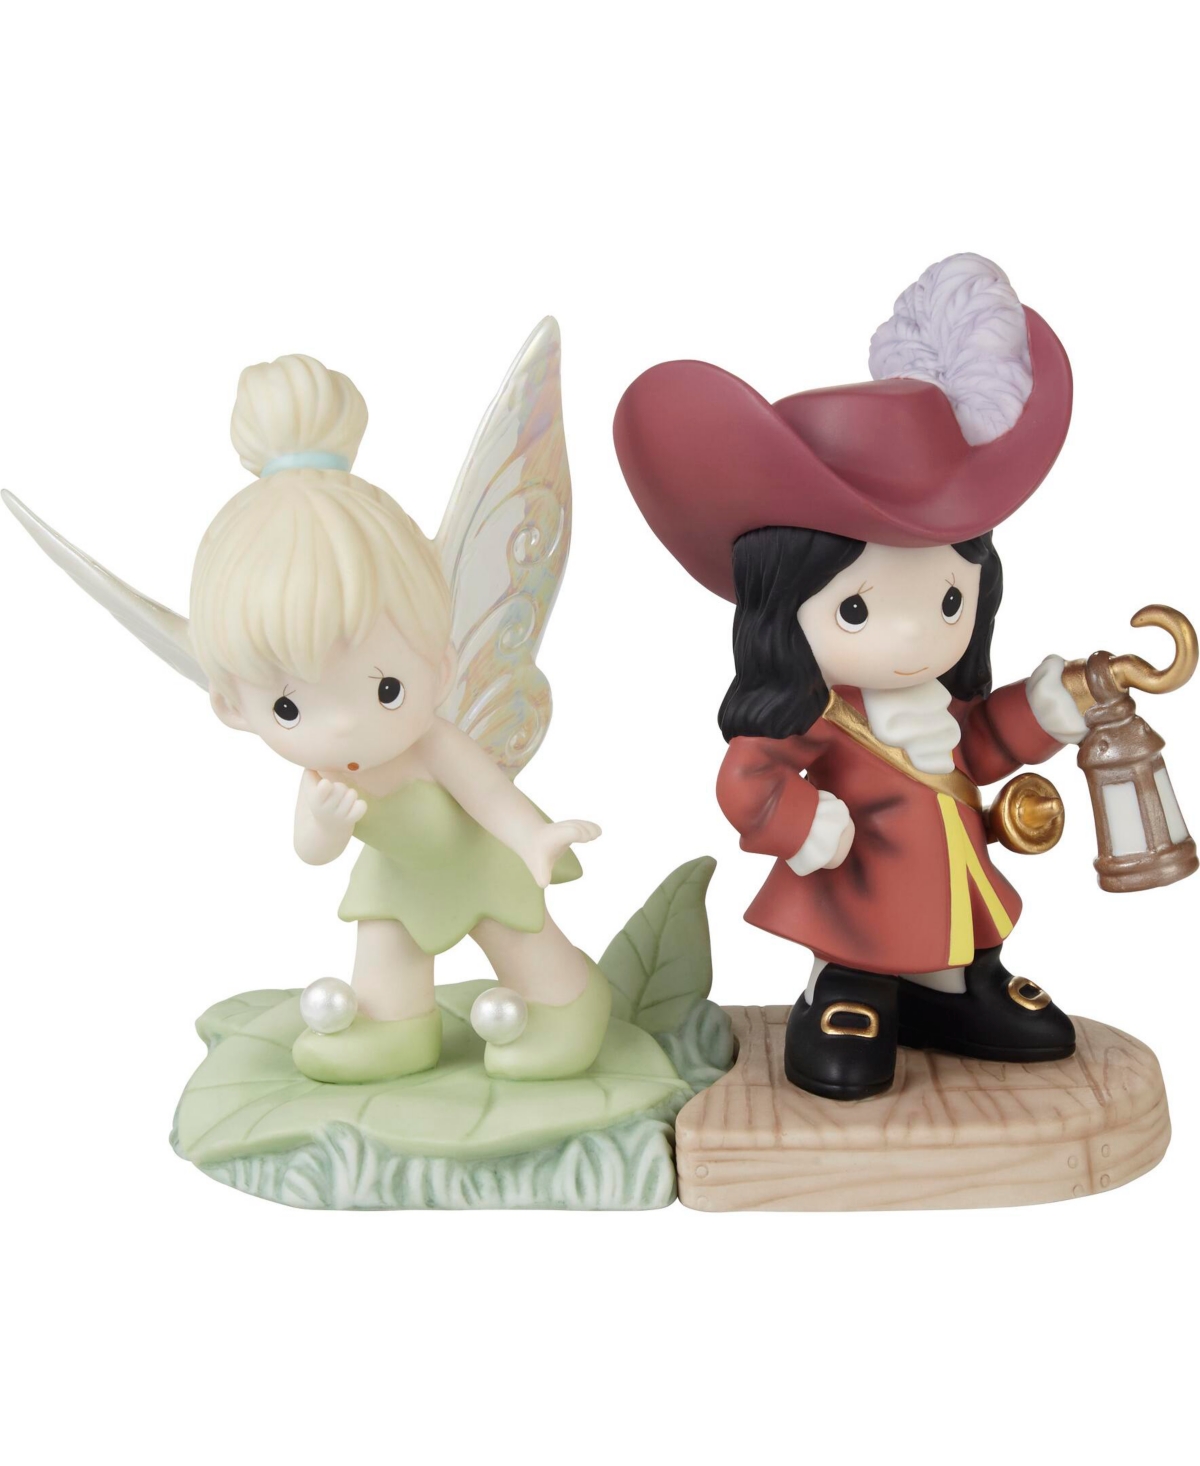 Precious Moments Life Is A Daring Adventure Disney Tinker Bell And Captain Hook 2-piece Bisque Porcelain Figurine Set In Multicolored